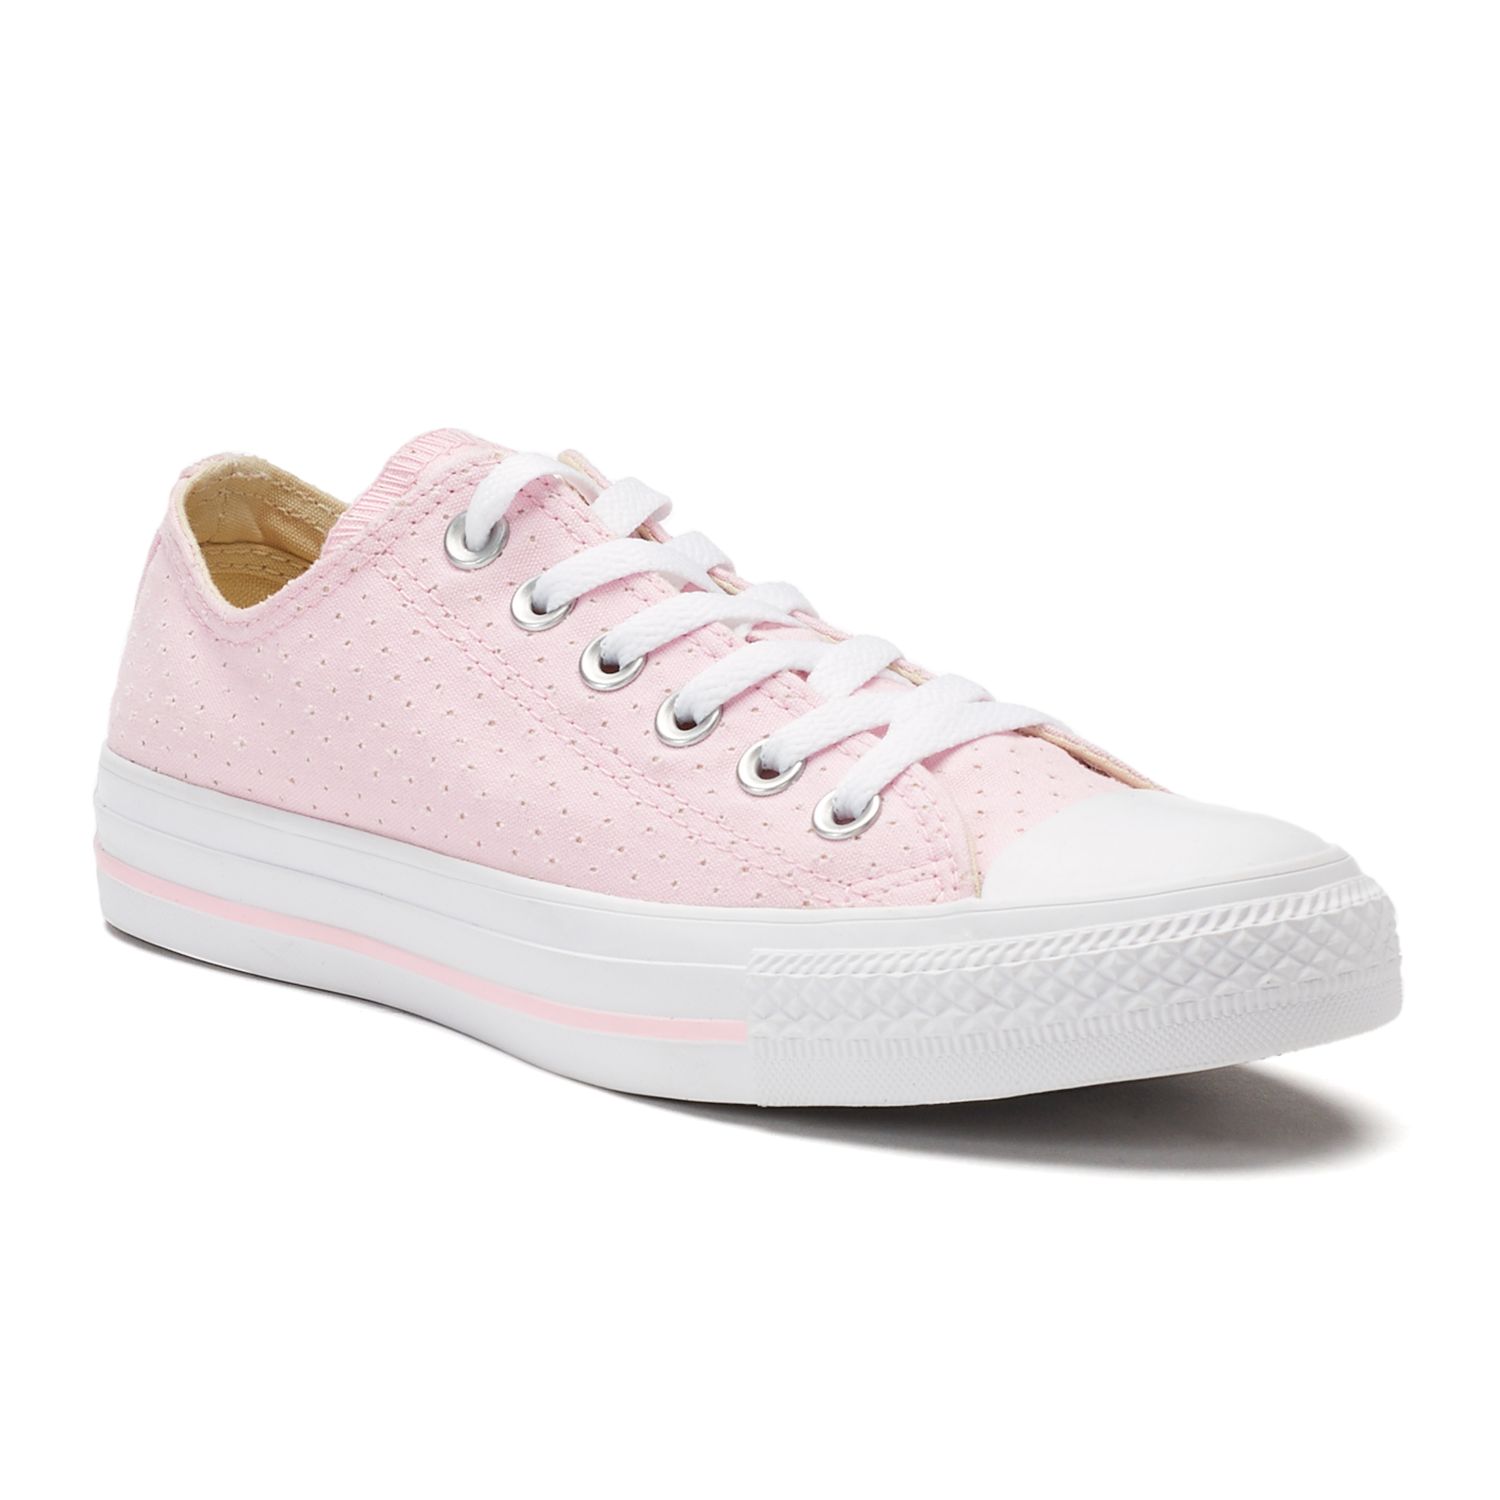 converse all star pink womens